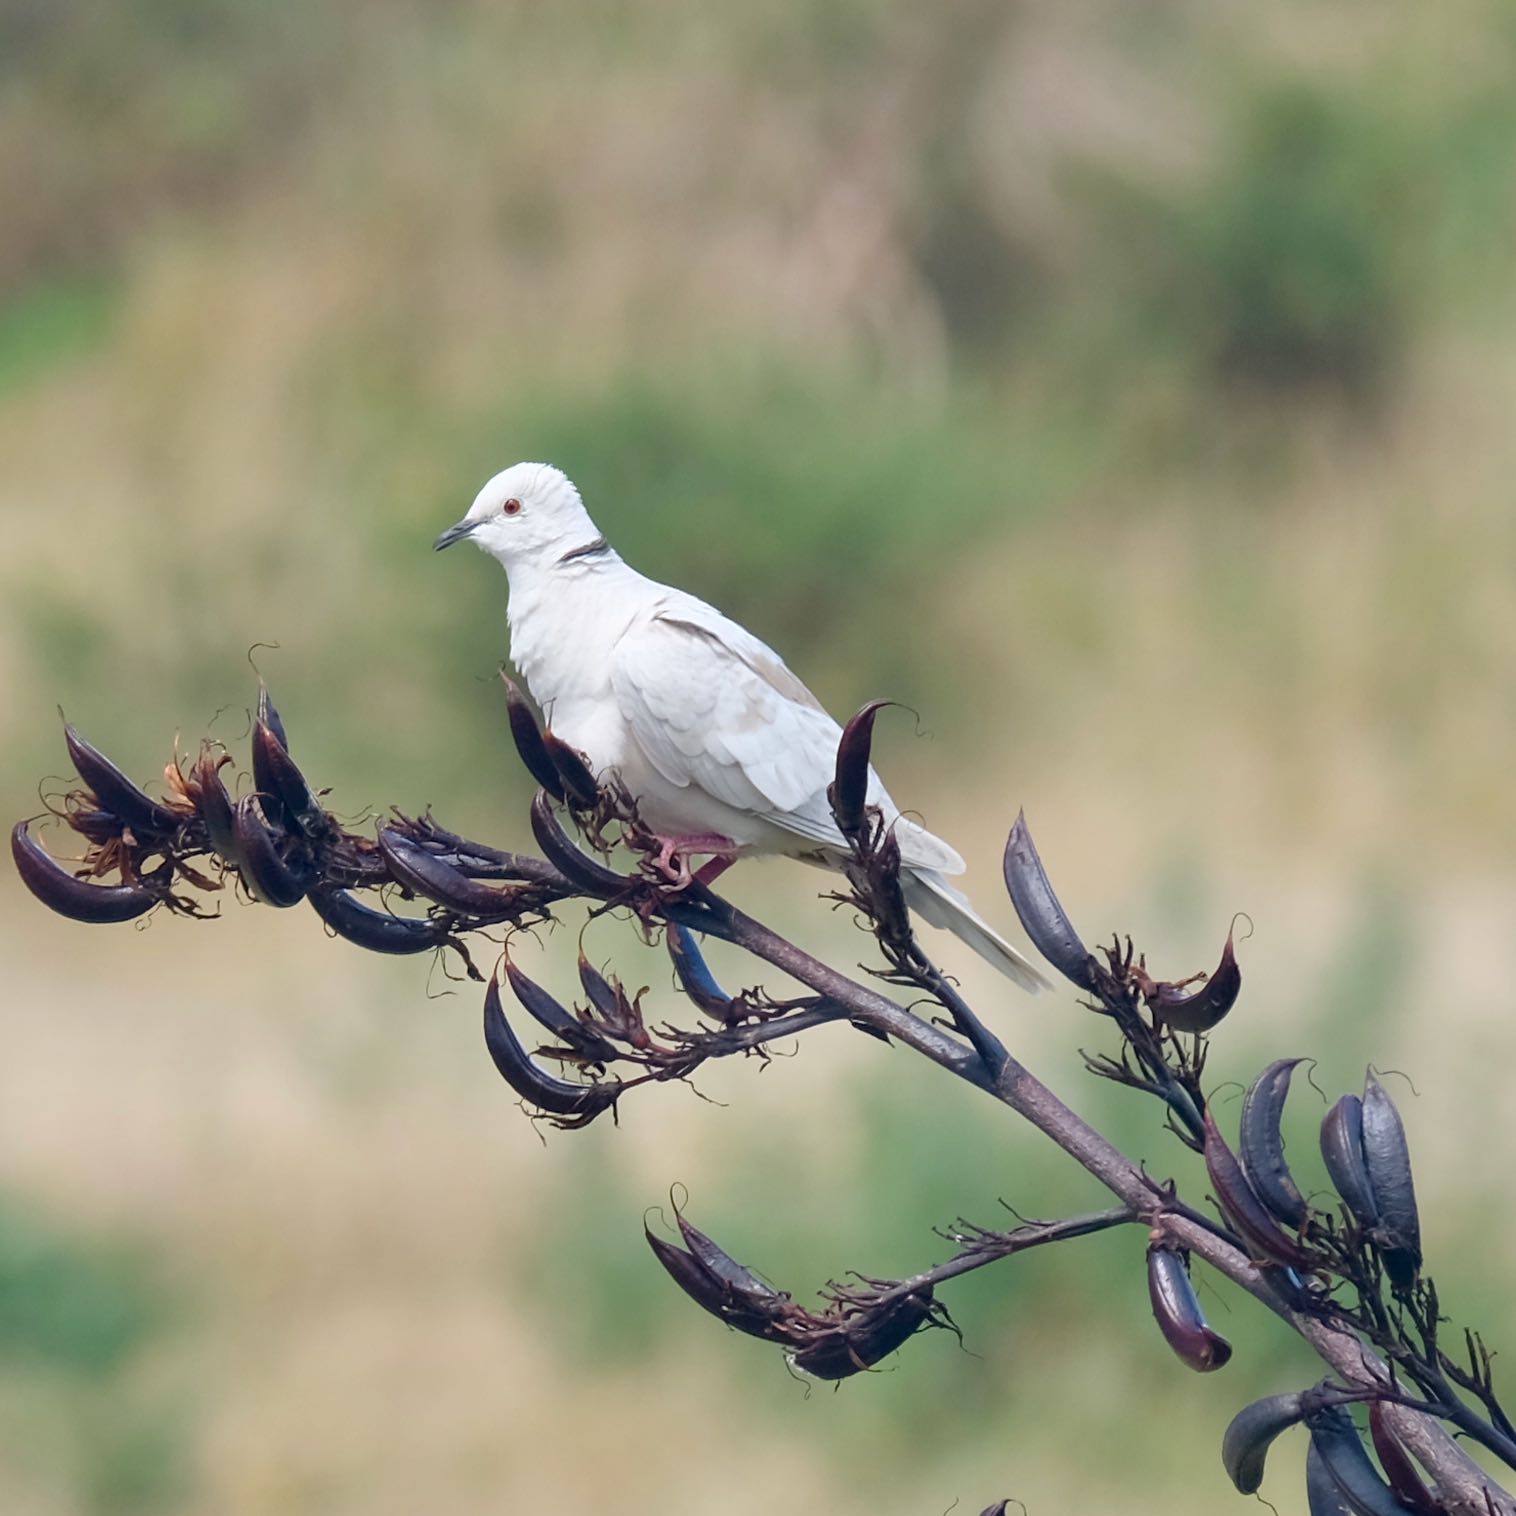 Small white bird with dark ring on the back of the neck.